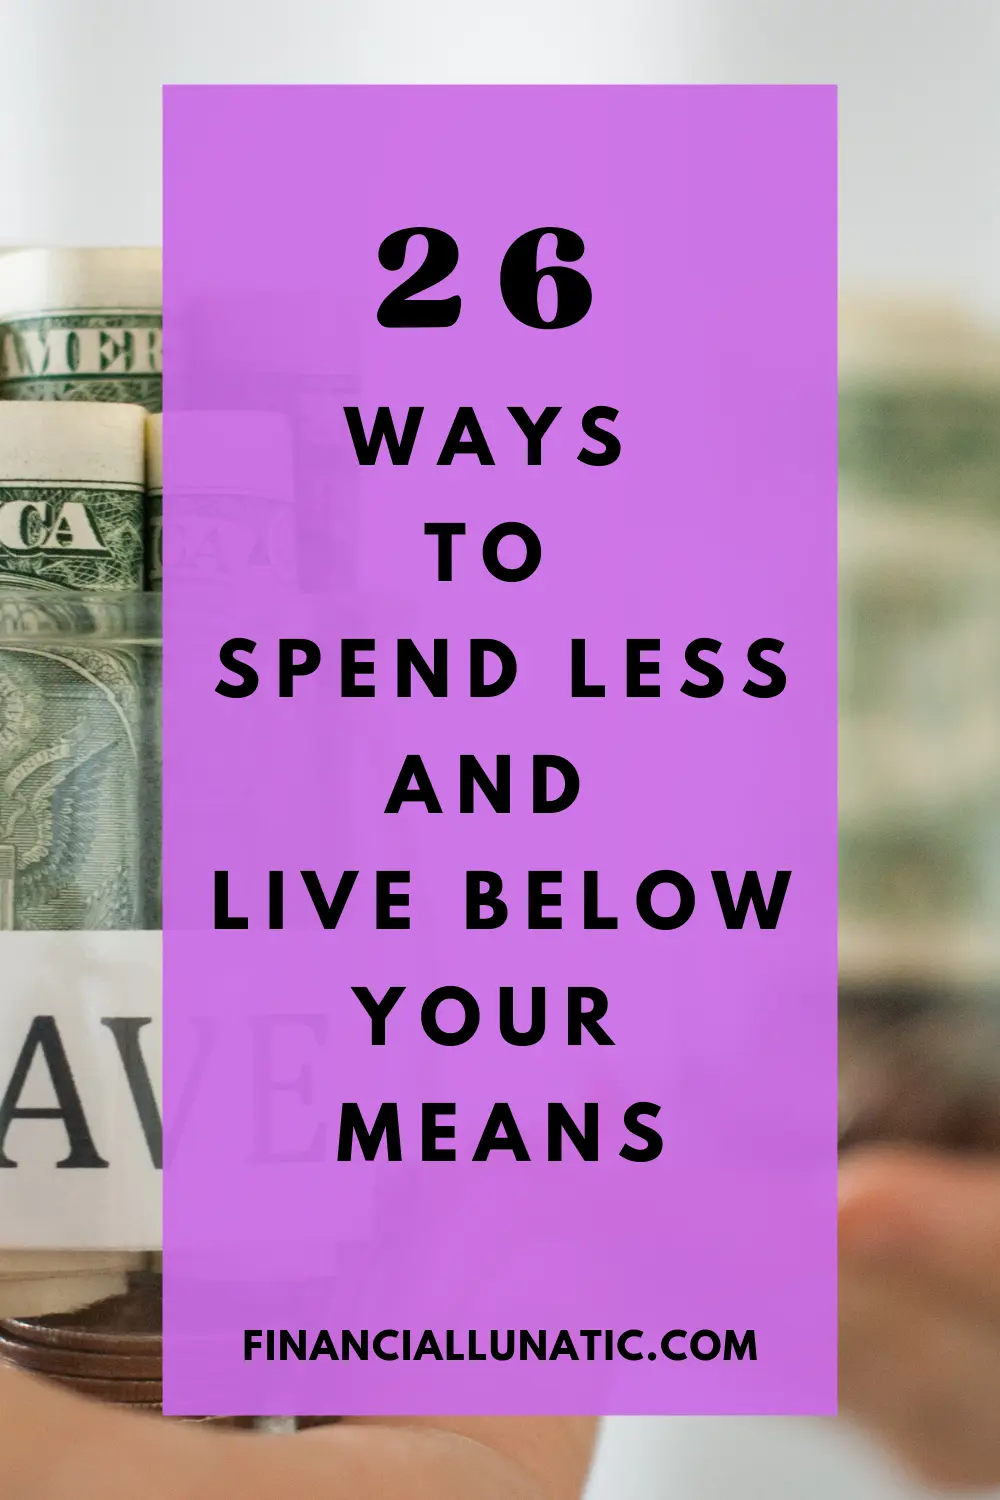 Living below your means